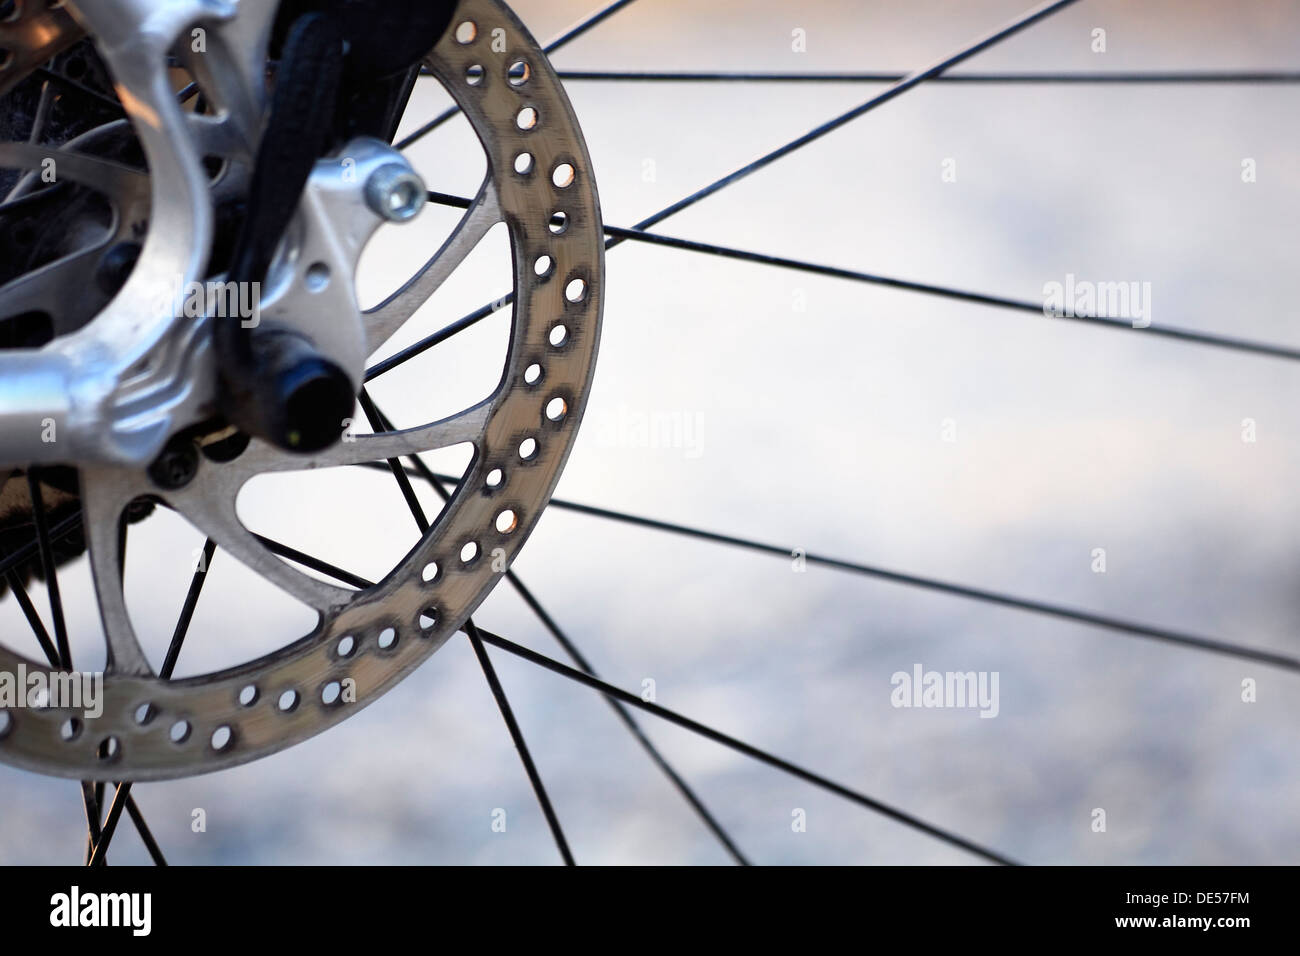 Disc brake with holes, front wheel, bike, bicycle Stock Photo